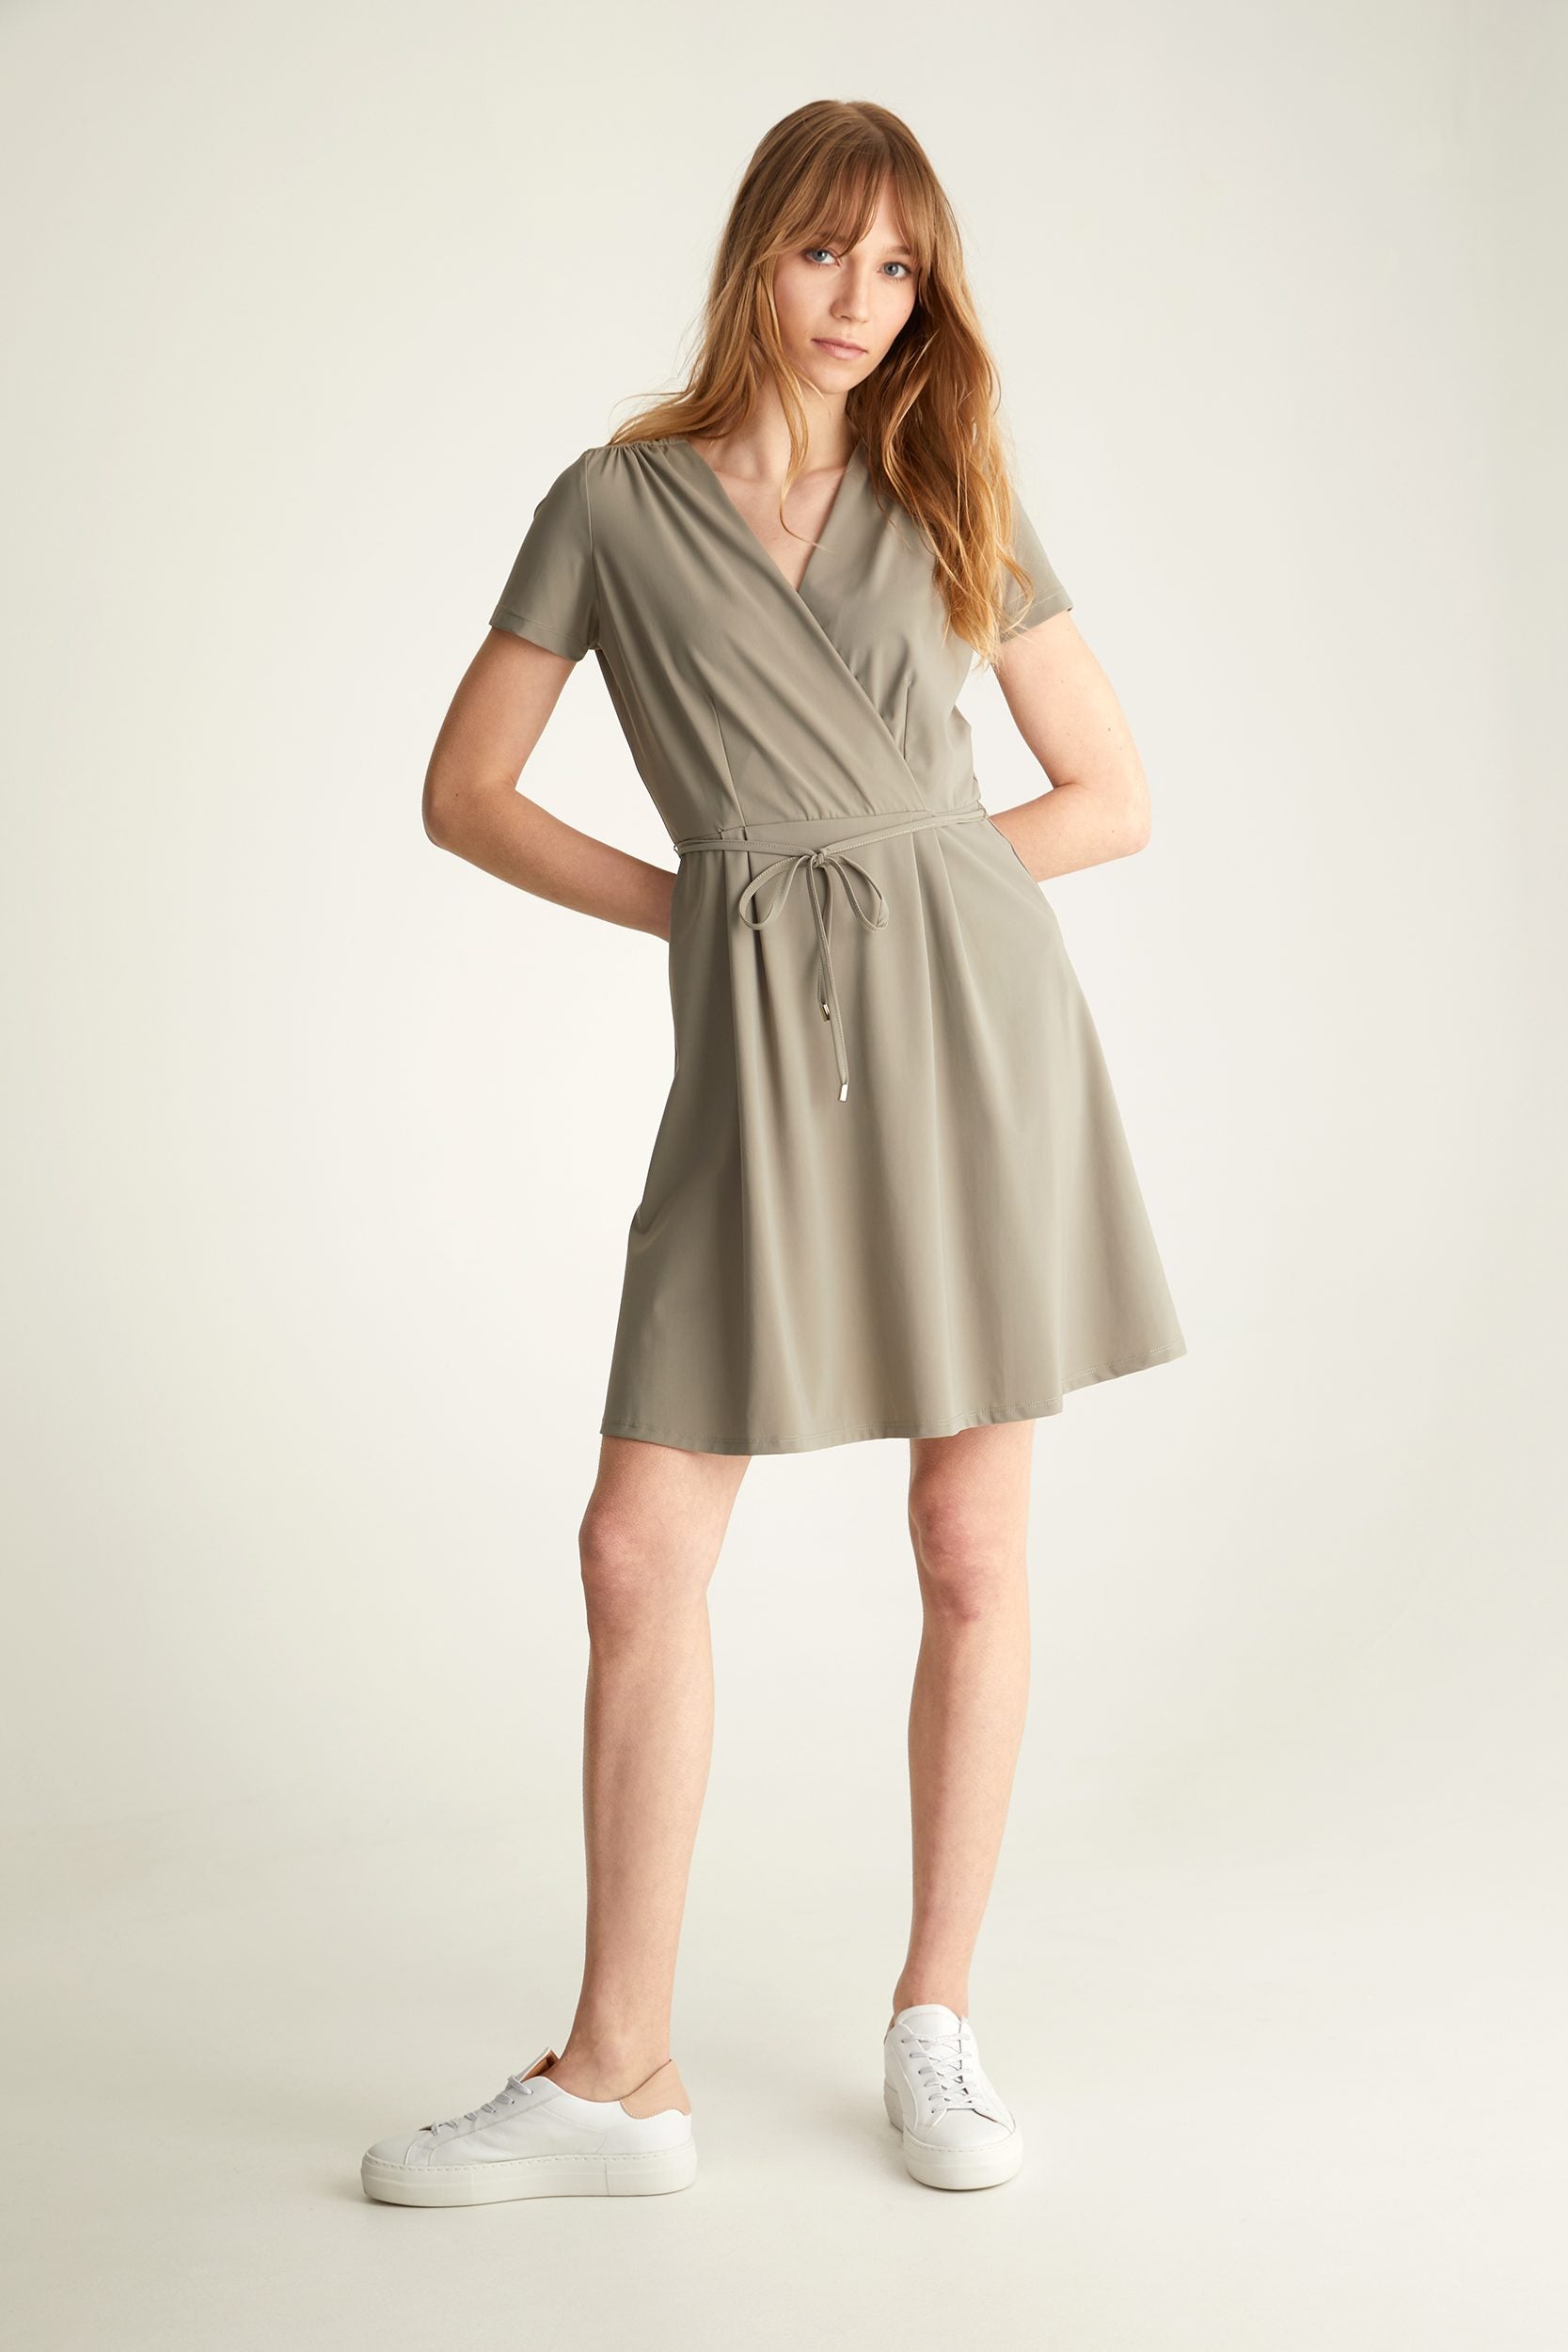 Fit & flare crossed front short sleeve Sport Chic dress